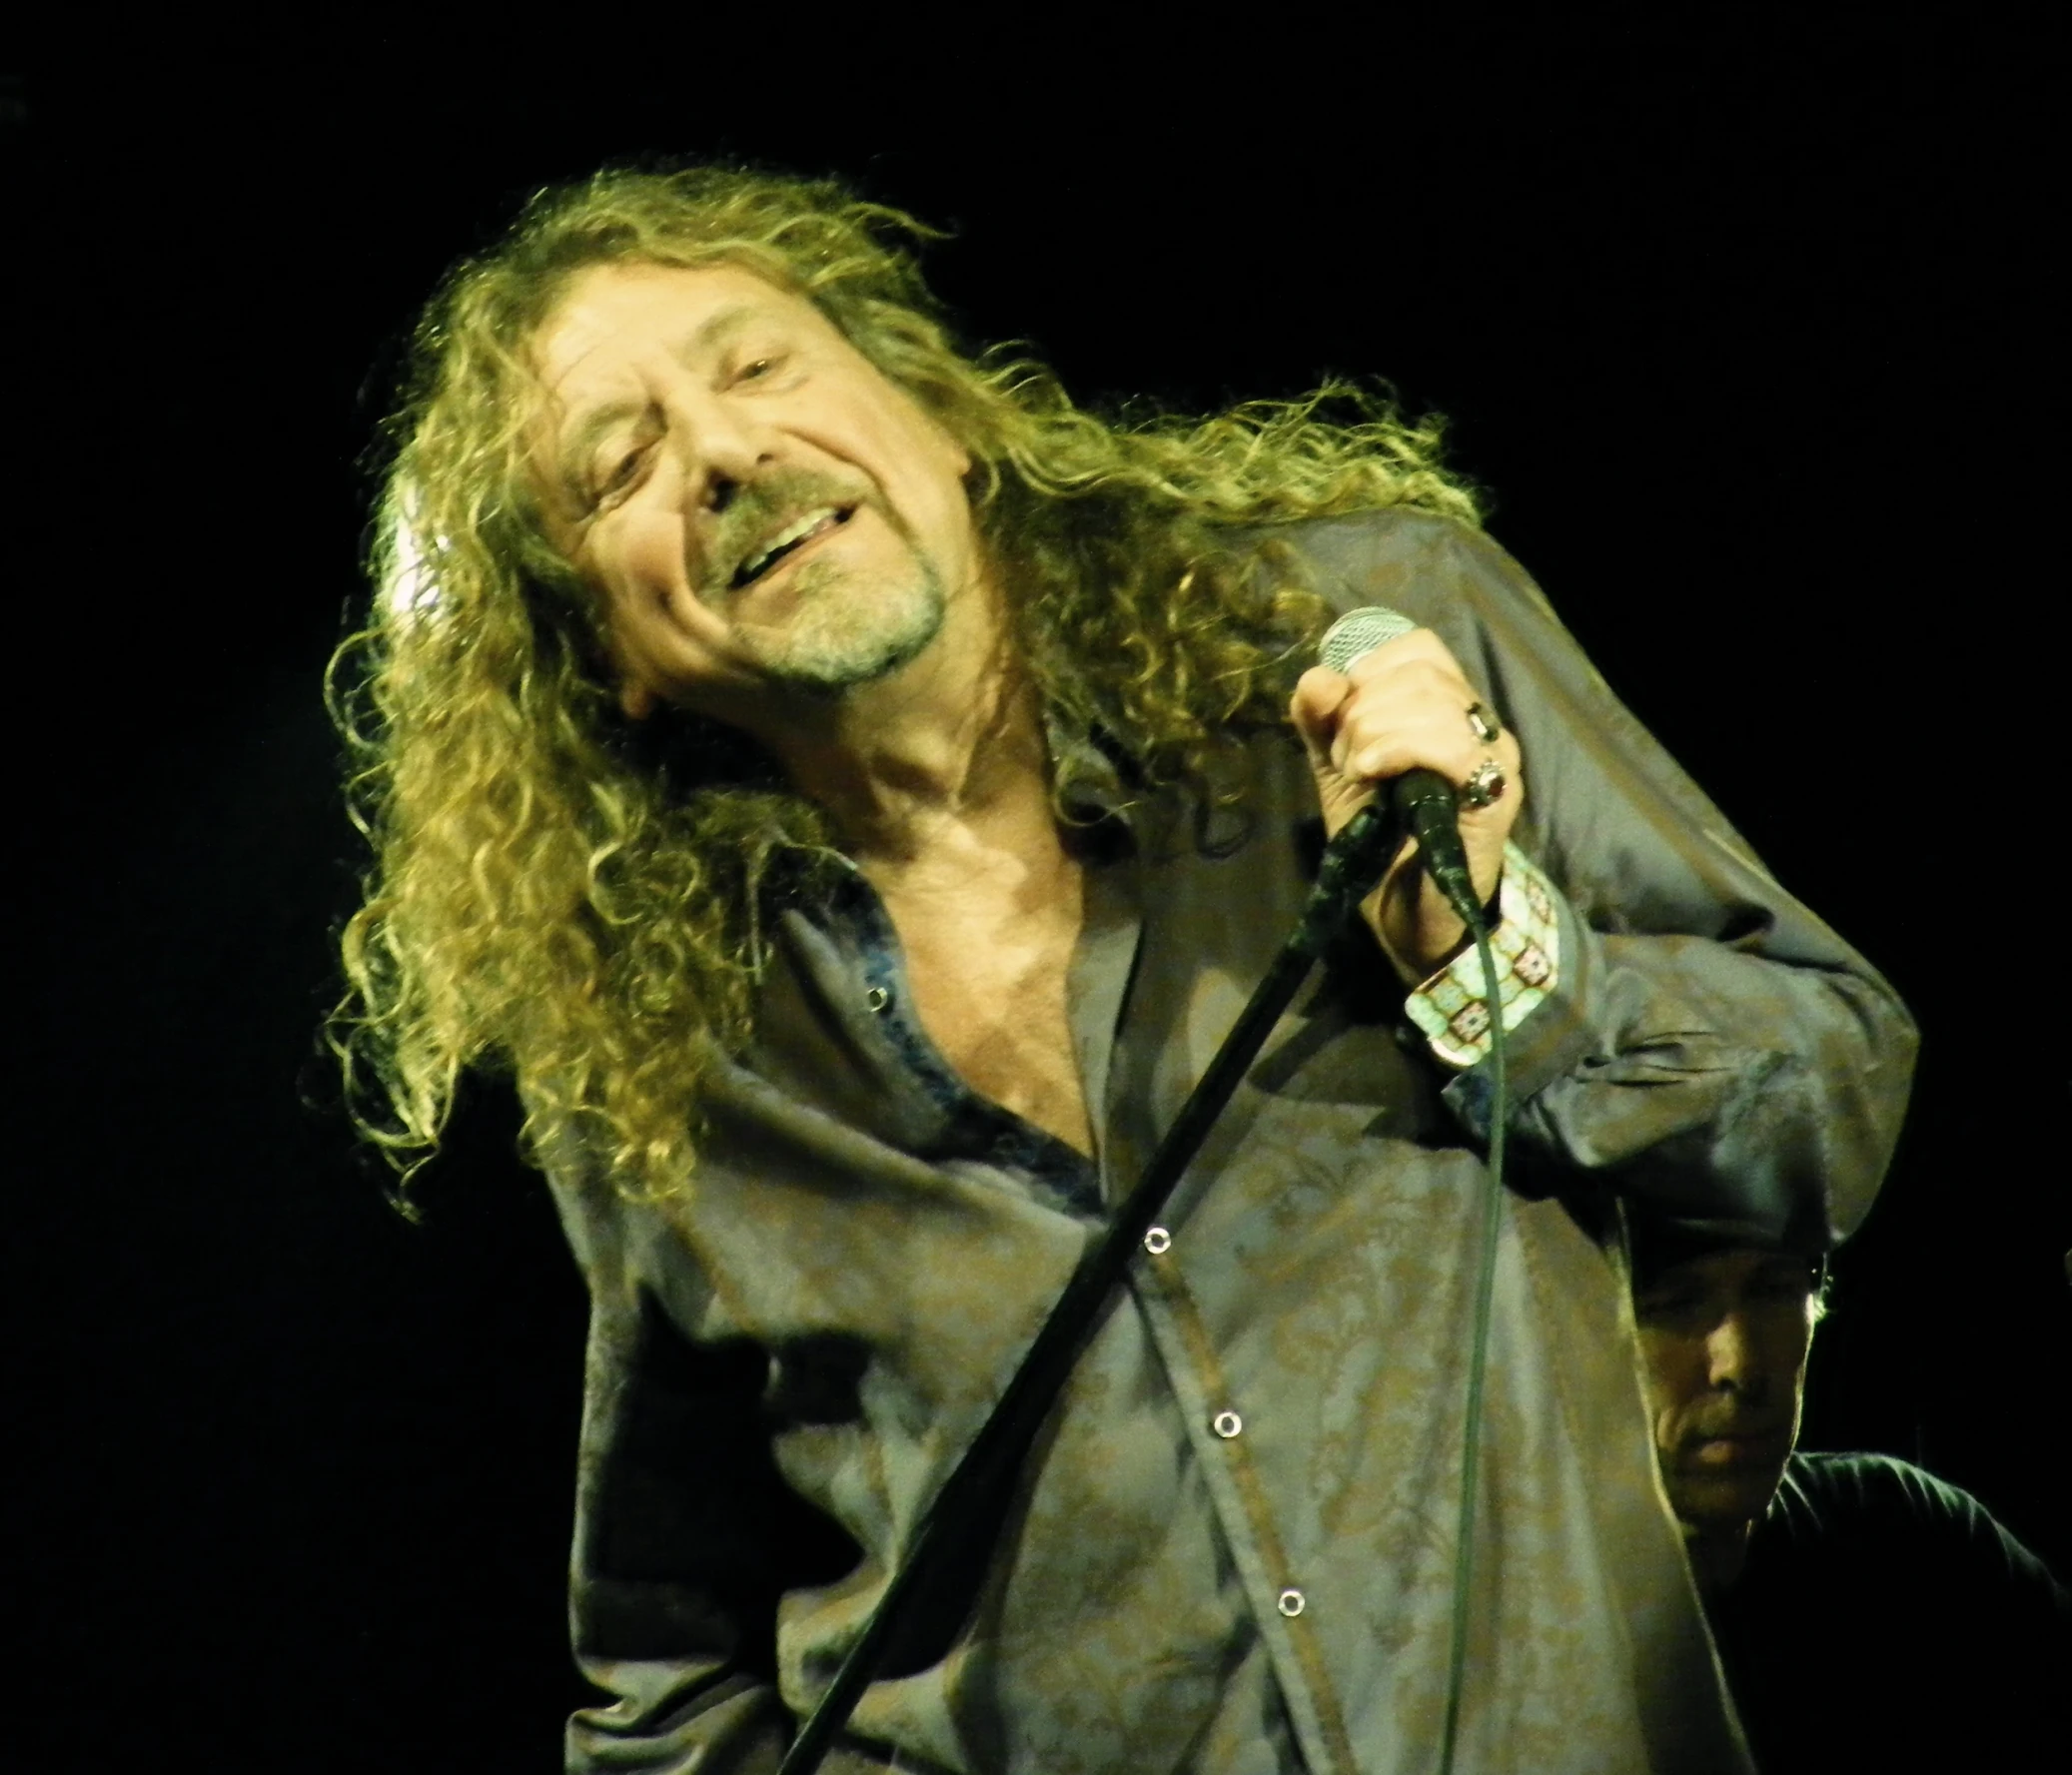 a man holding a microphone with long hair